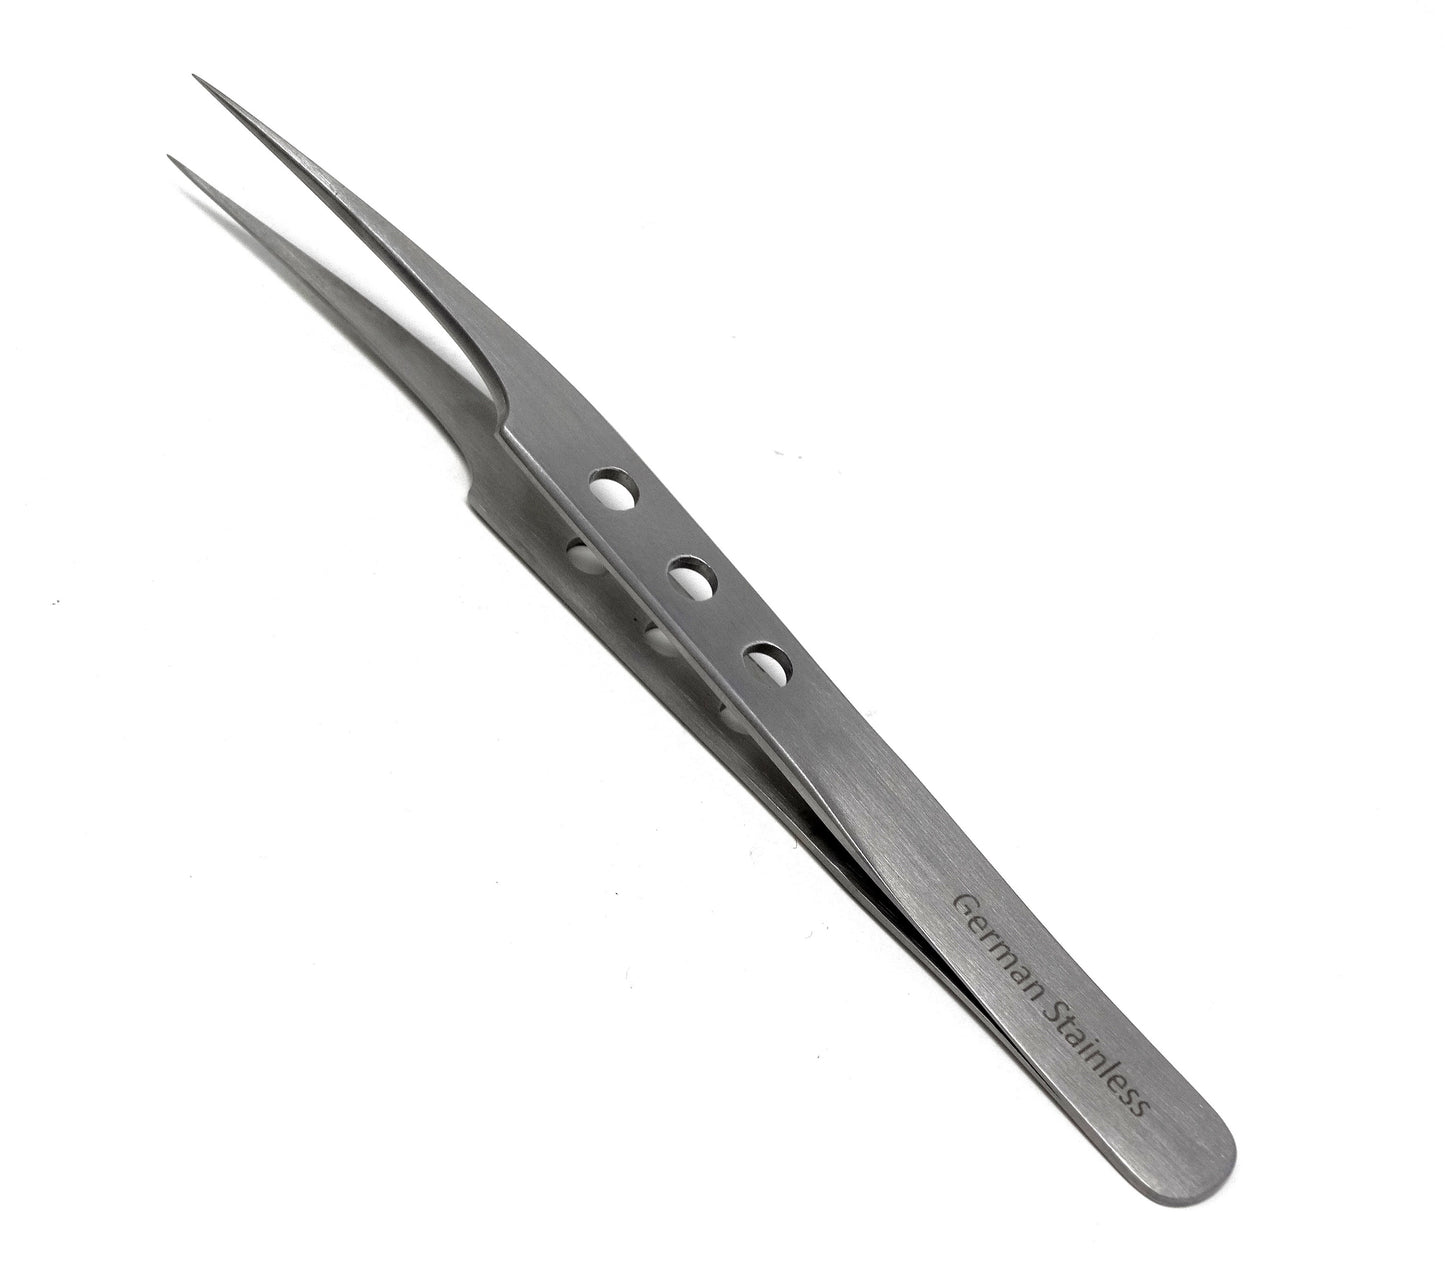 Stainless Steel Micro Surgical Forceps Tweezers Pro Straight, Fenestrated Handle, Premium Quality